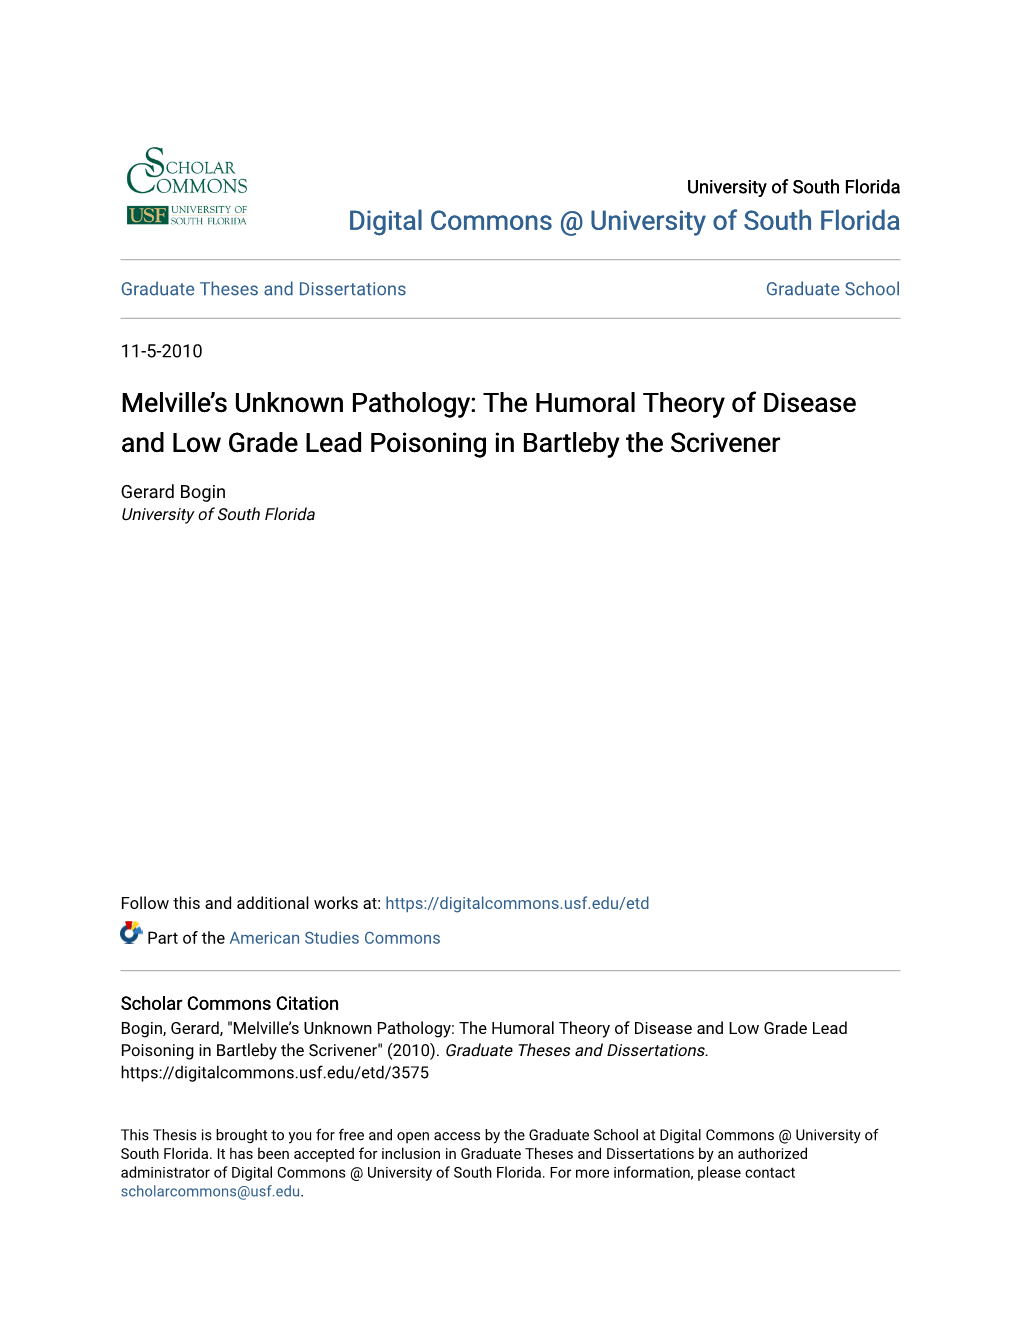 Melville's Unknown Pathology: the Humoral Theory of Disease